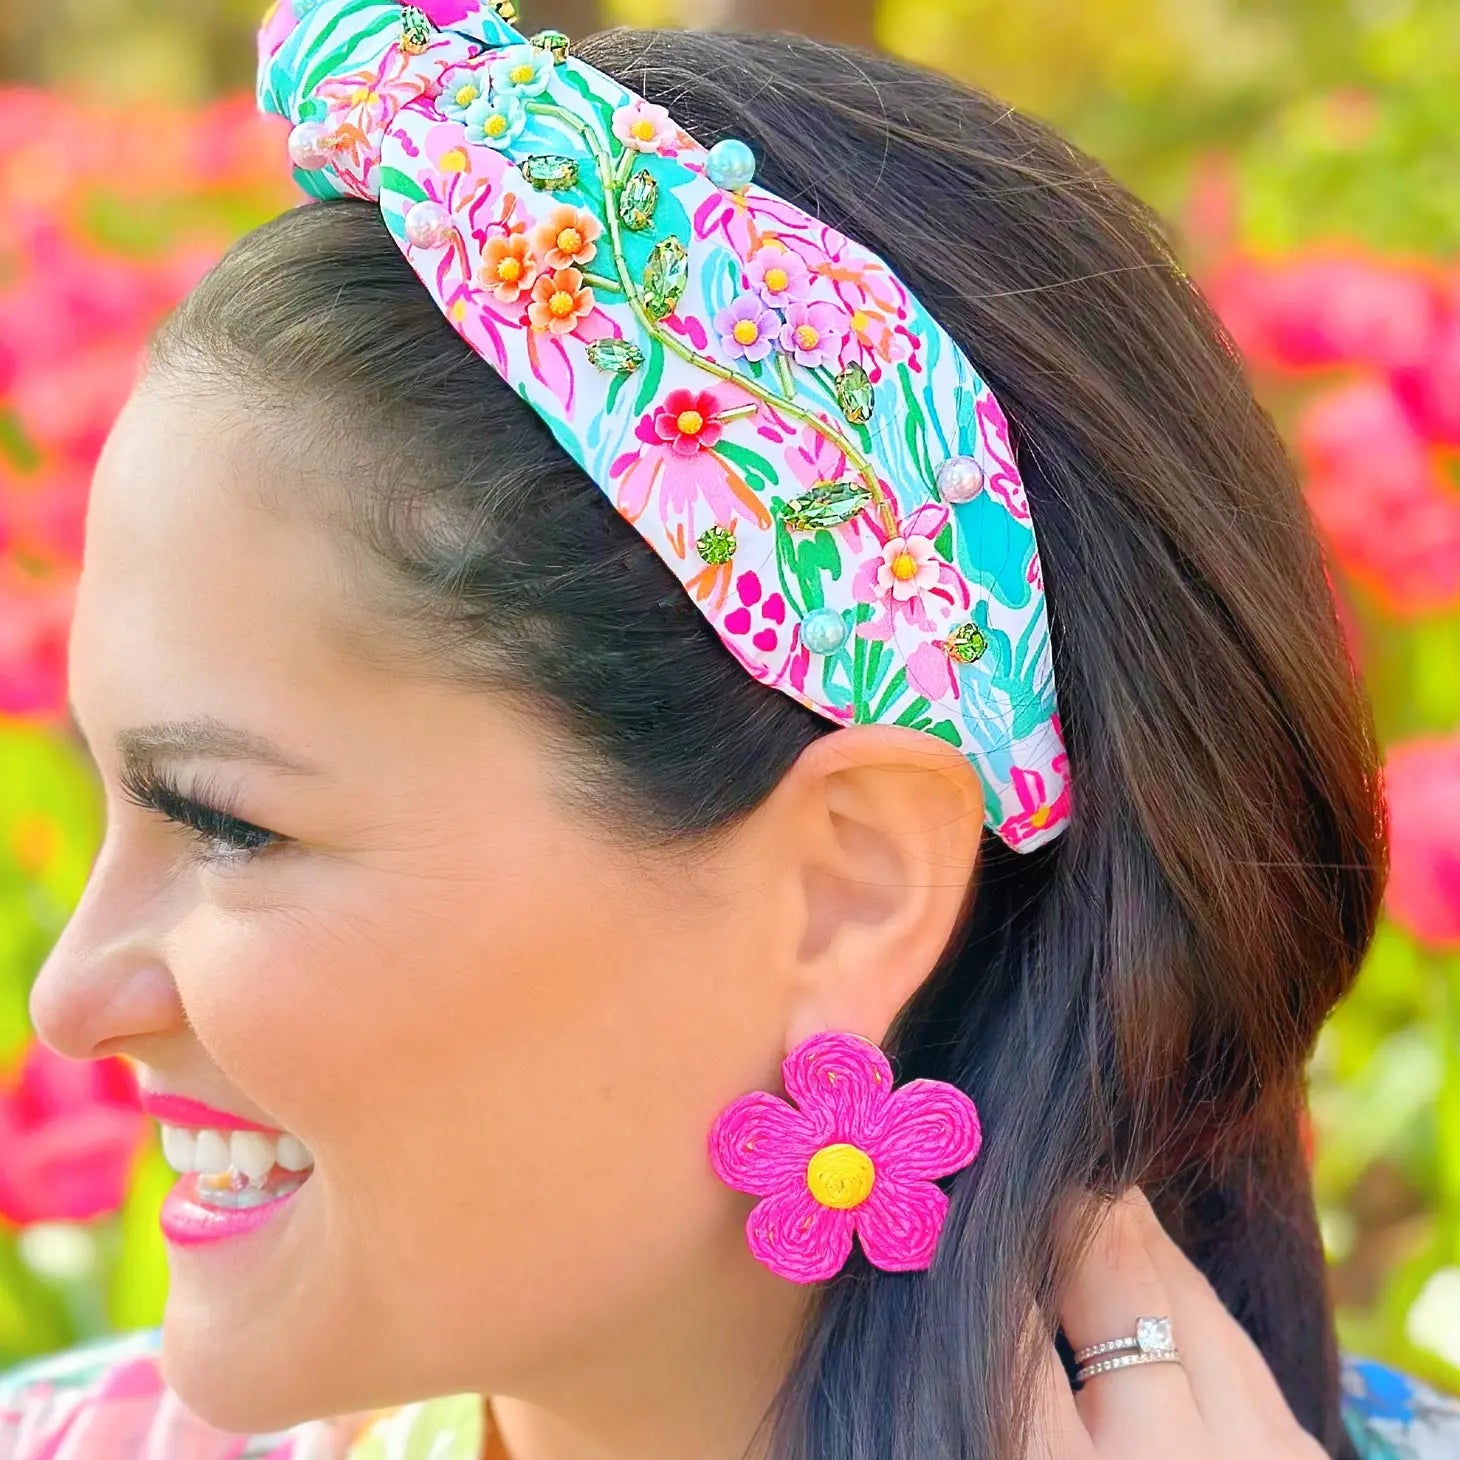 Spring Flower Garden Headband with Crystals and Pearls by Brianna Cannon